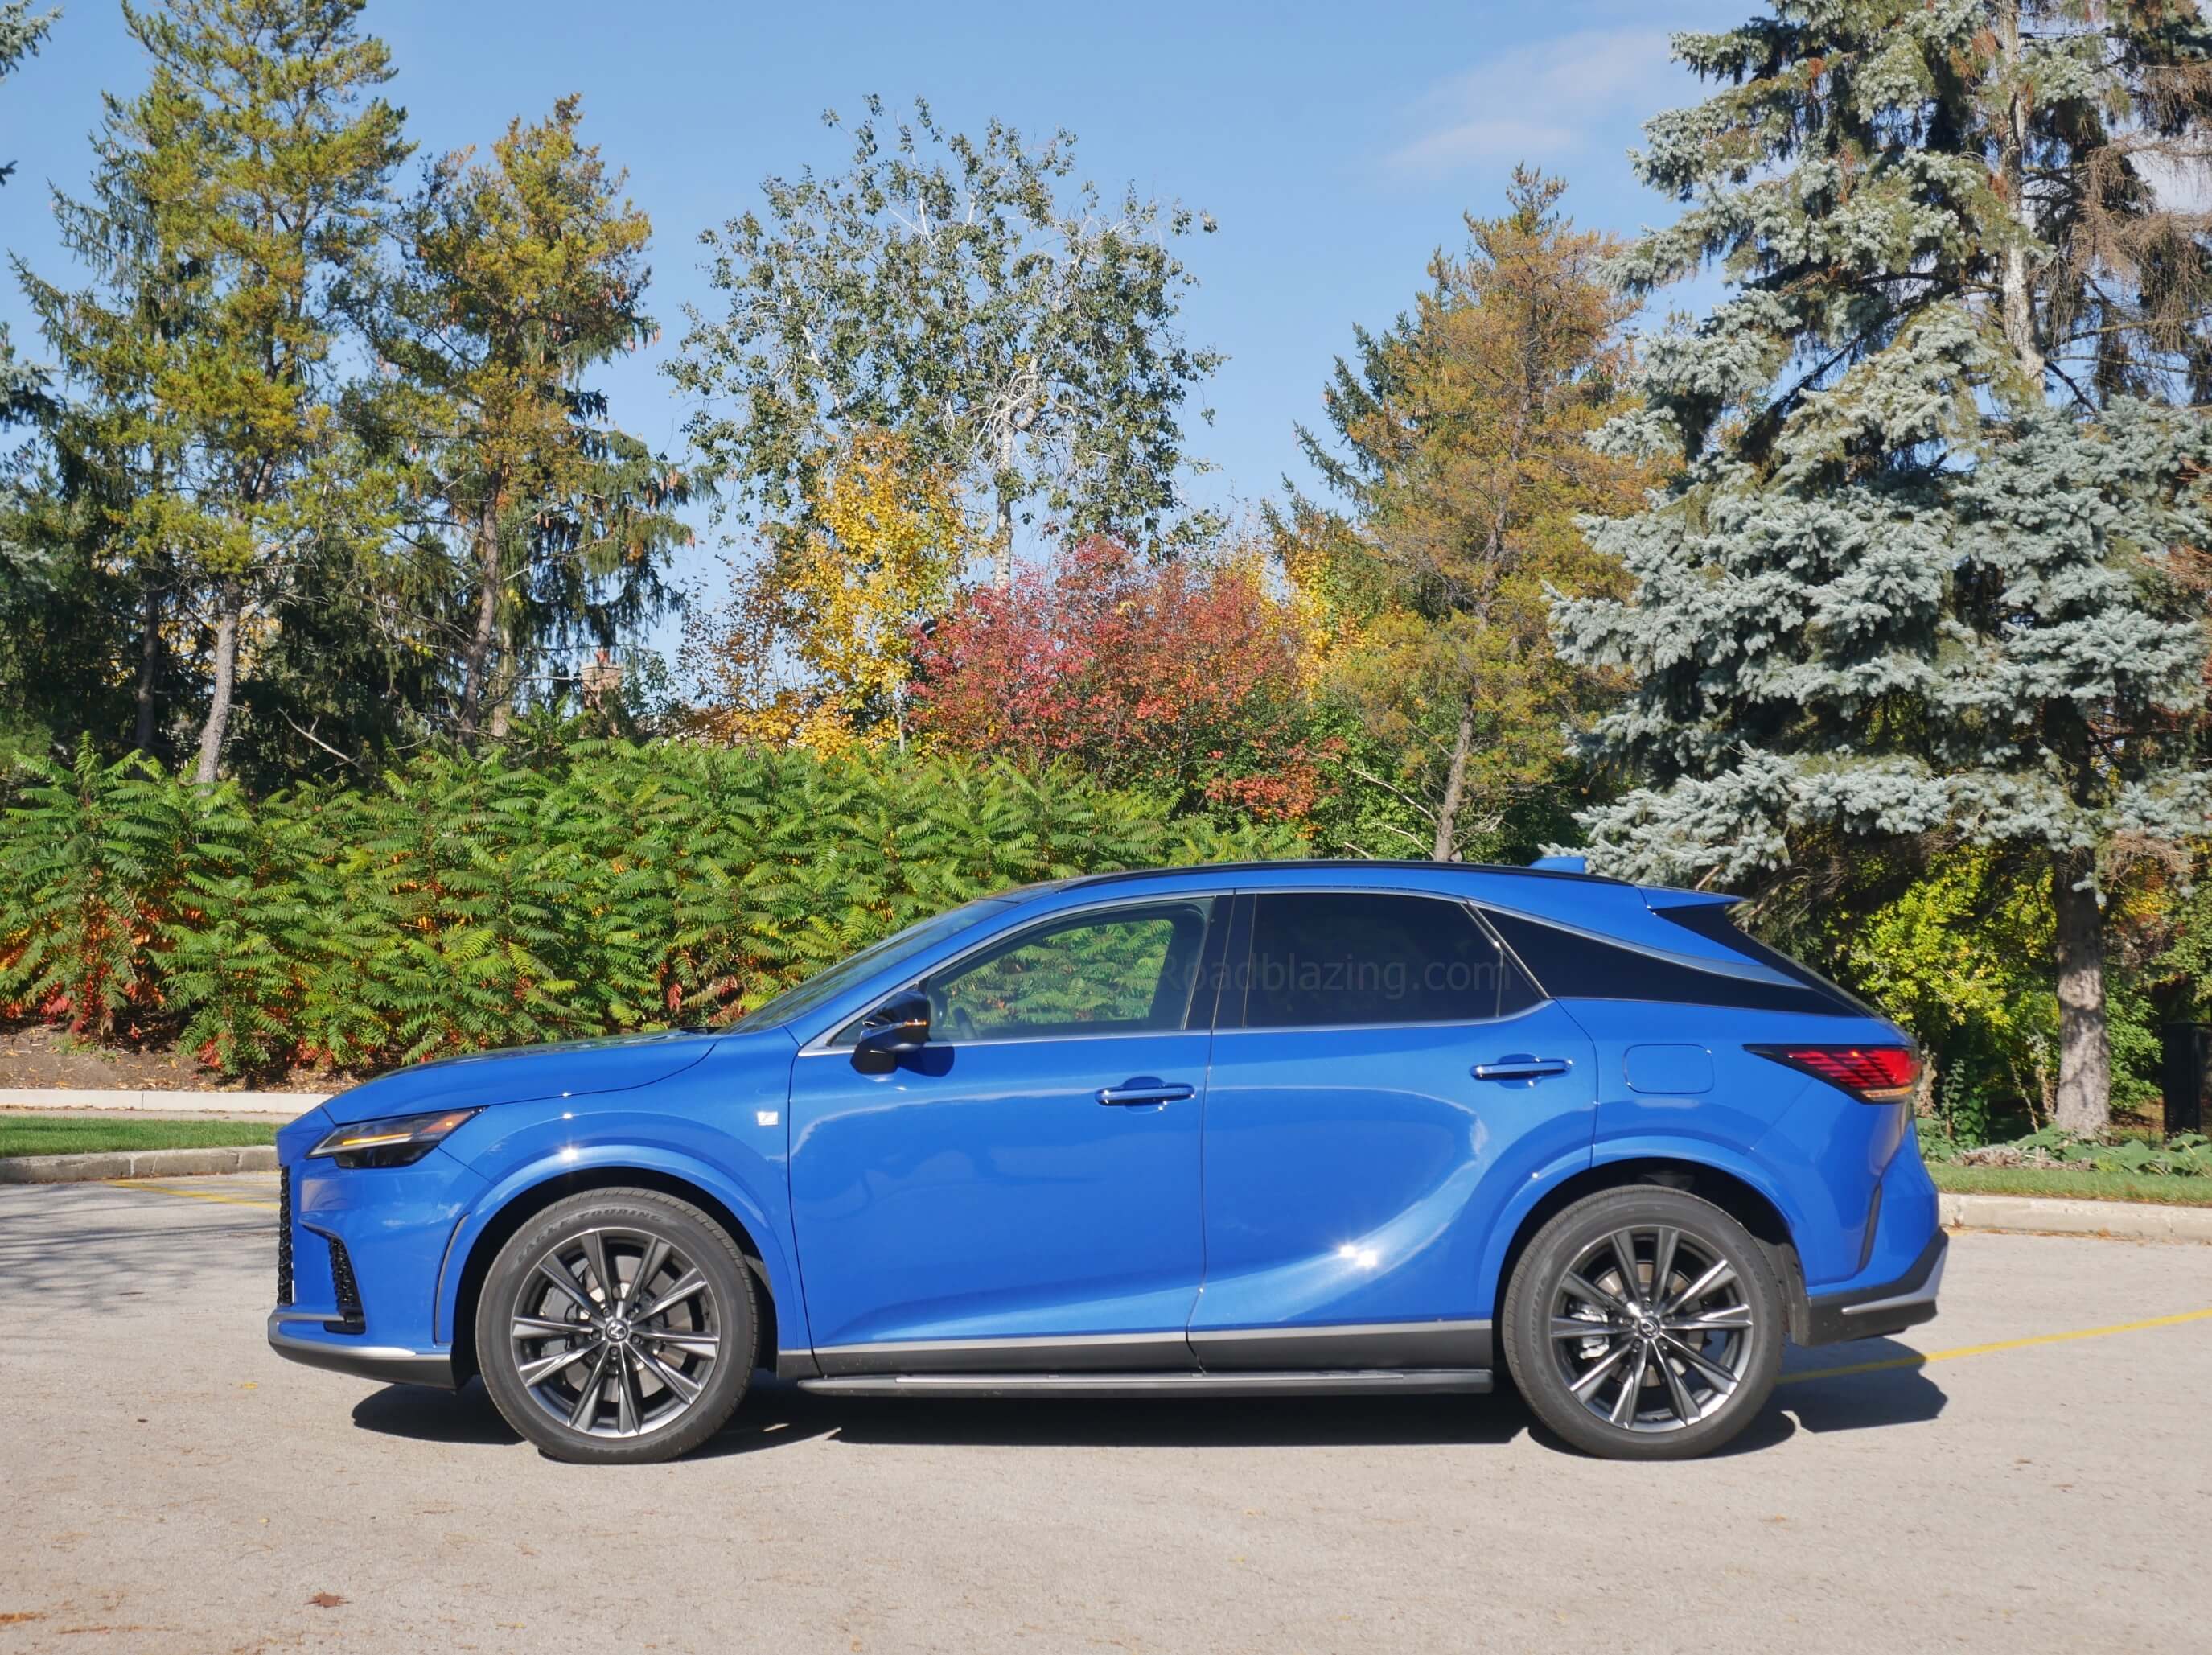 2023 Lexus RX 350 F-Sport AWD: body creasing is smoother